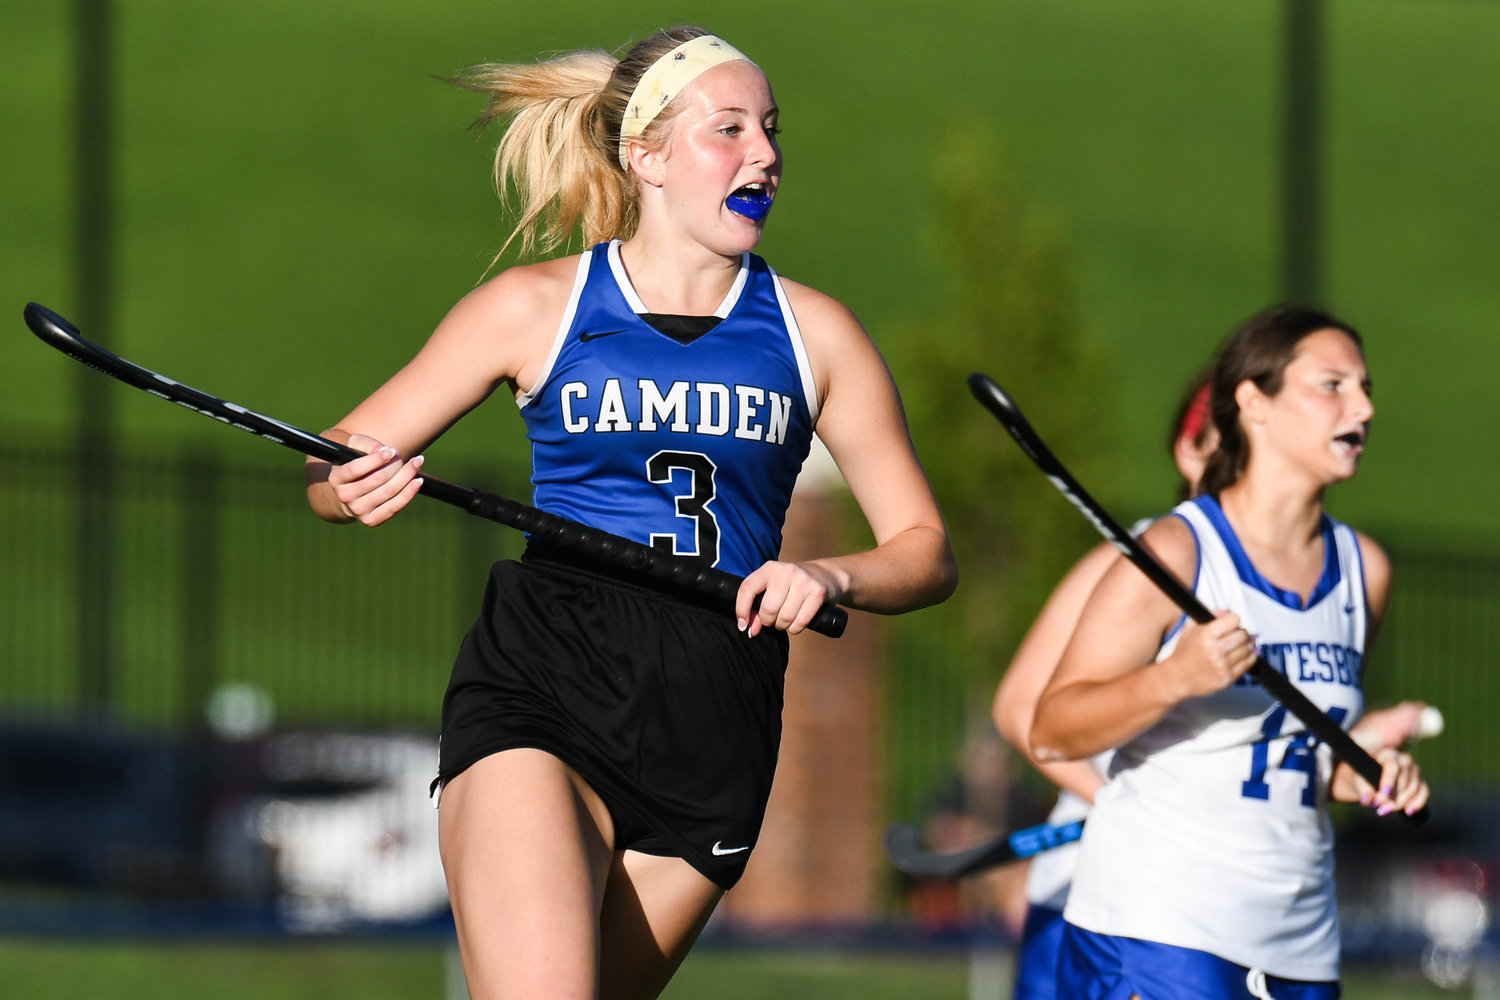 Camden player Emily Bird looks for a loose ball during the field hockey game against Whitesboro on Wednesday. Camden won 2-1.